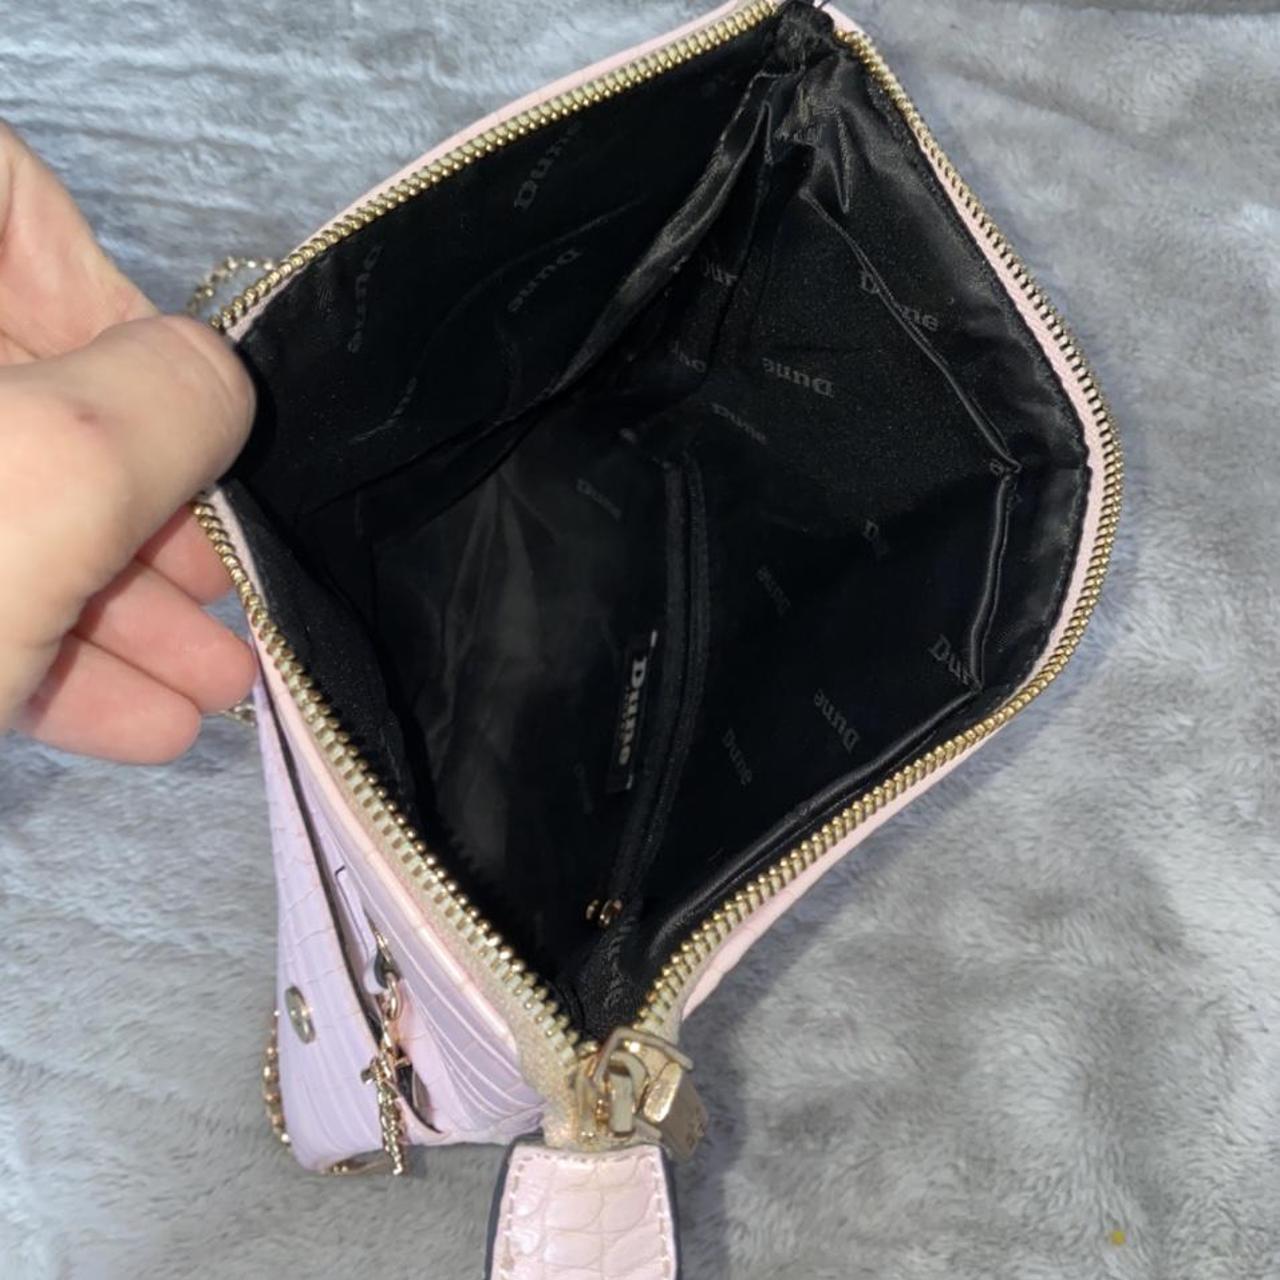 Dune pastel pink folding clutch pouch bag with gold... - Depop